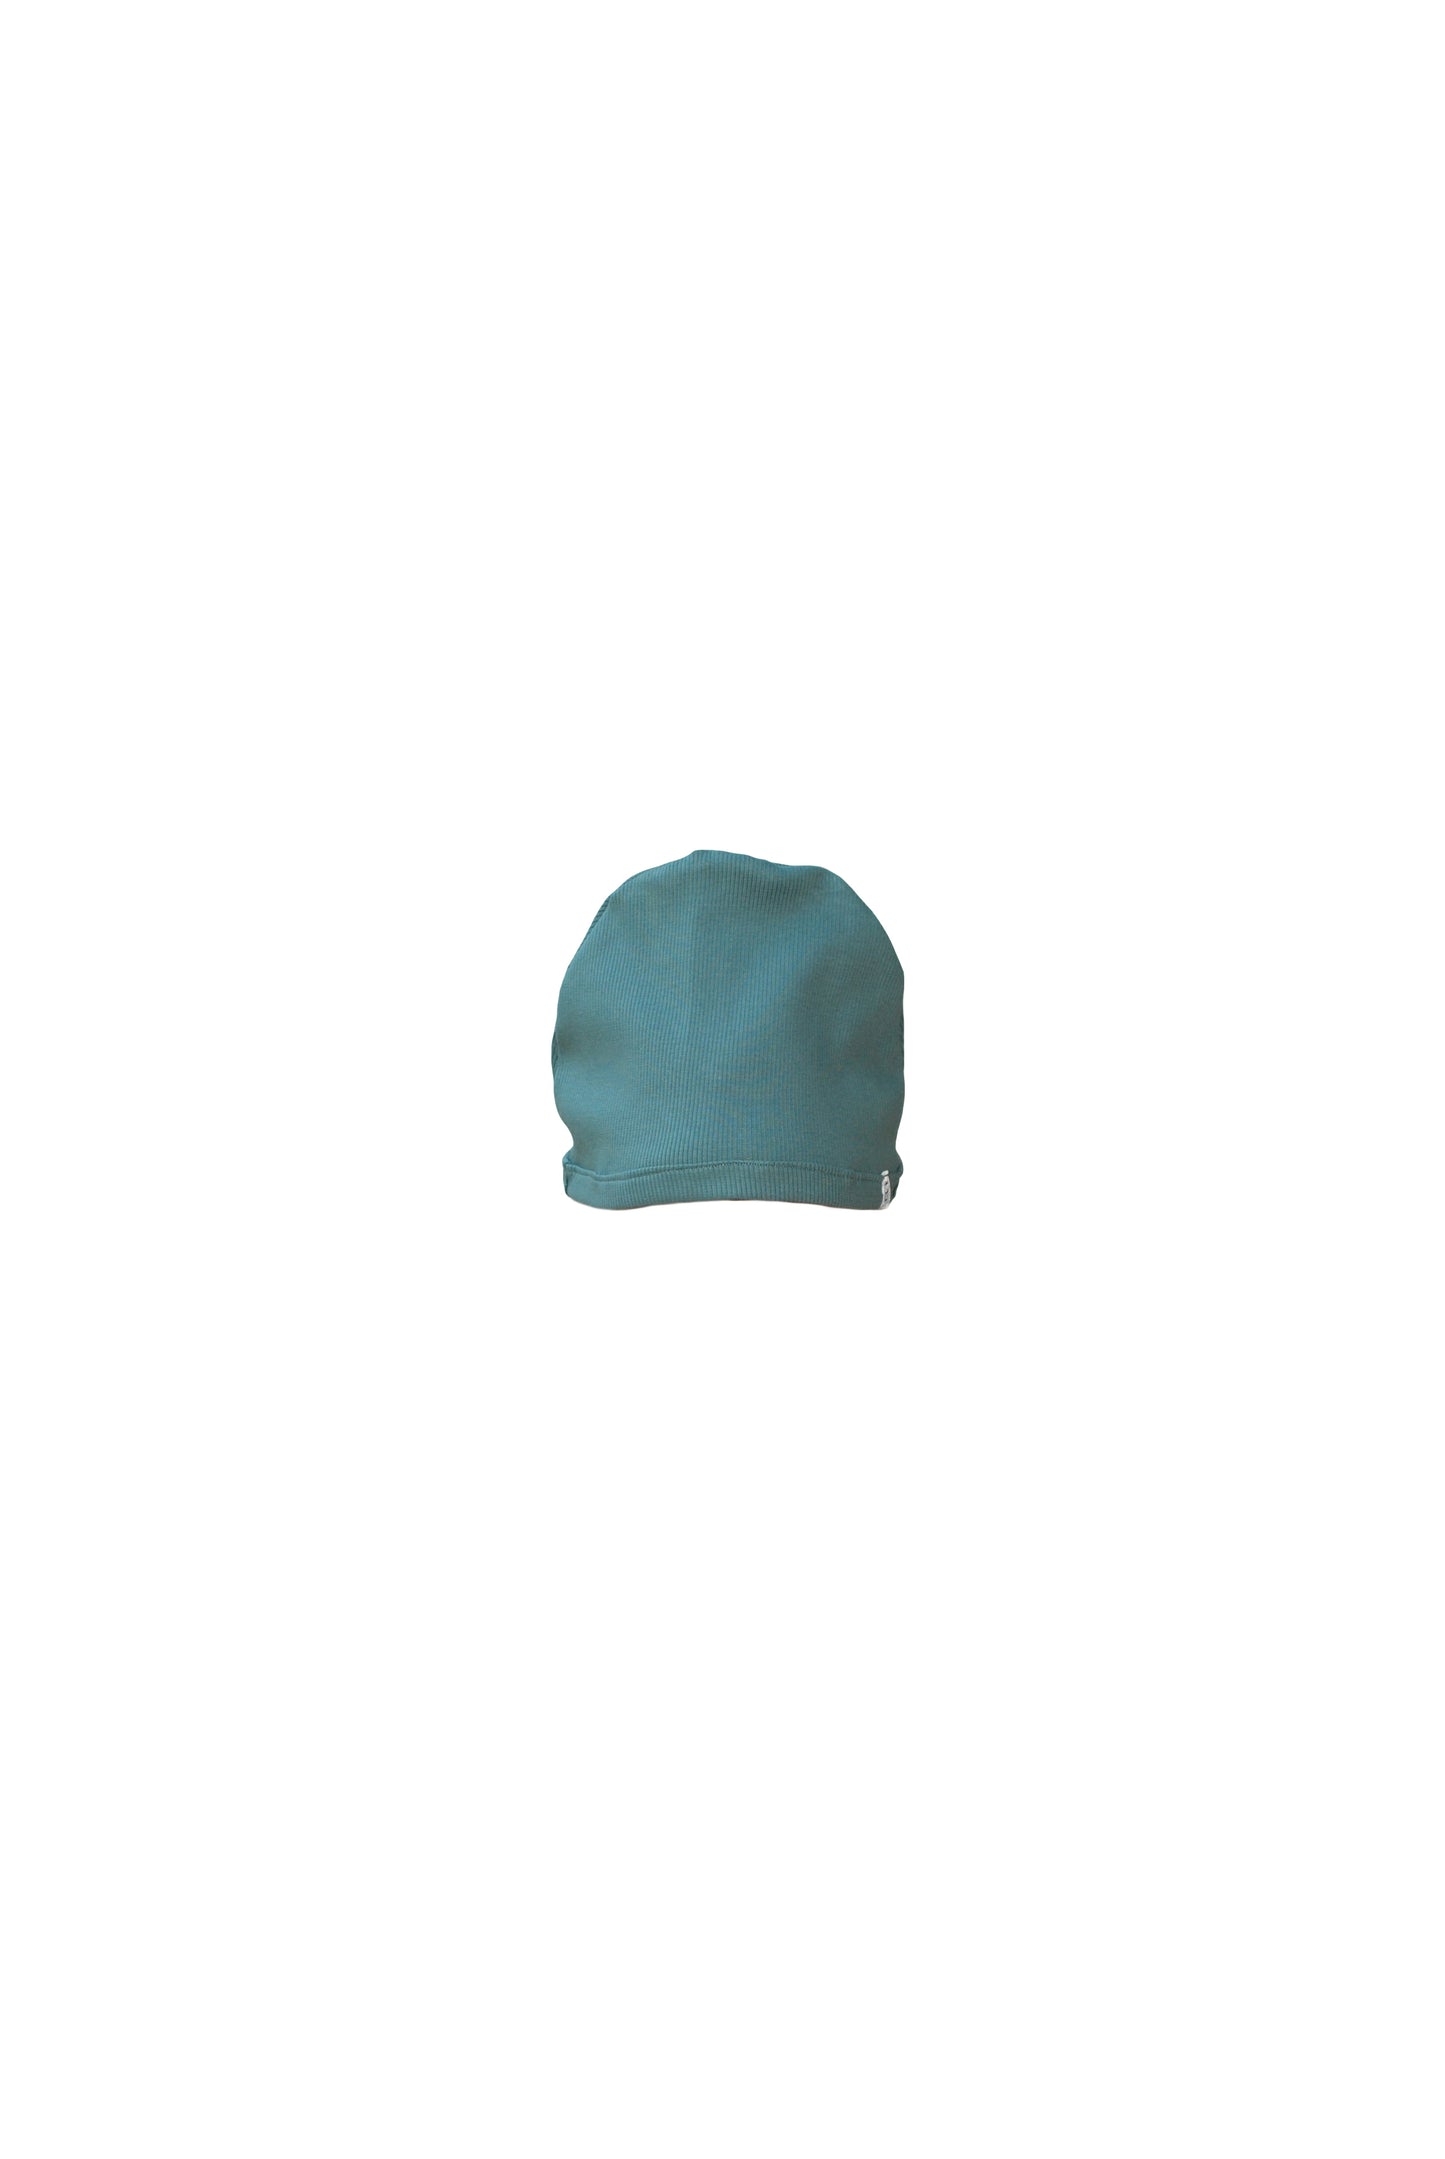 Blue Hat Front Flat Lay | Beatrice Bayliss